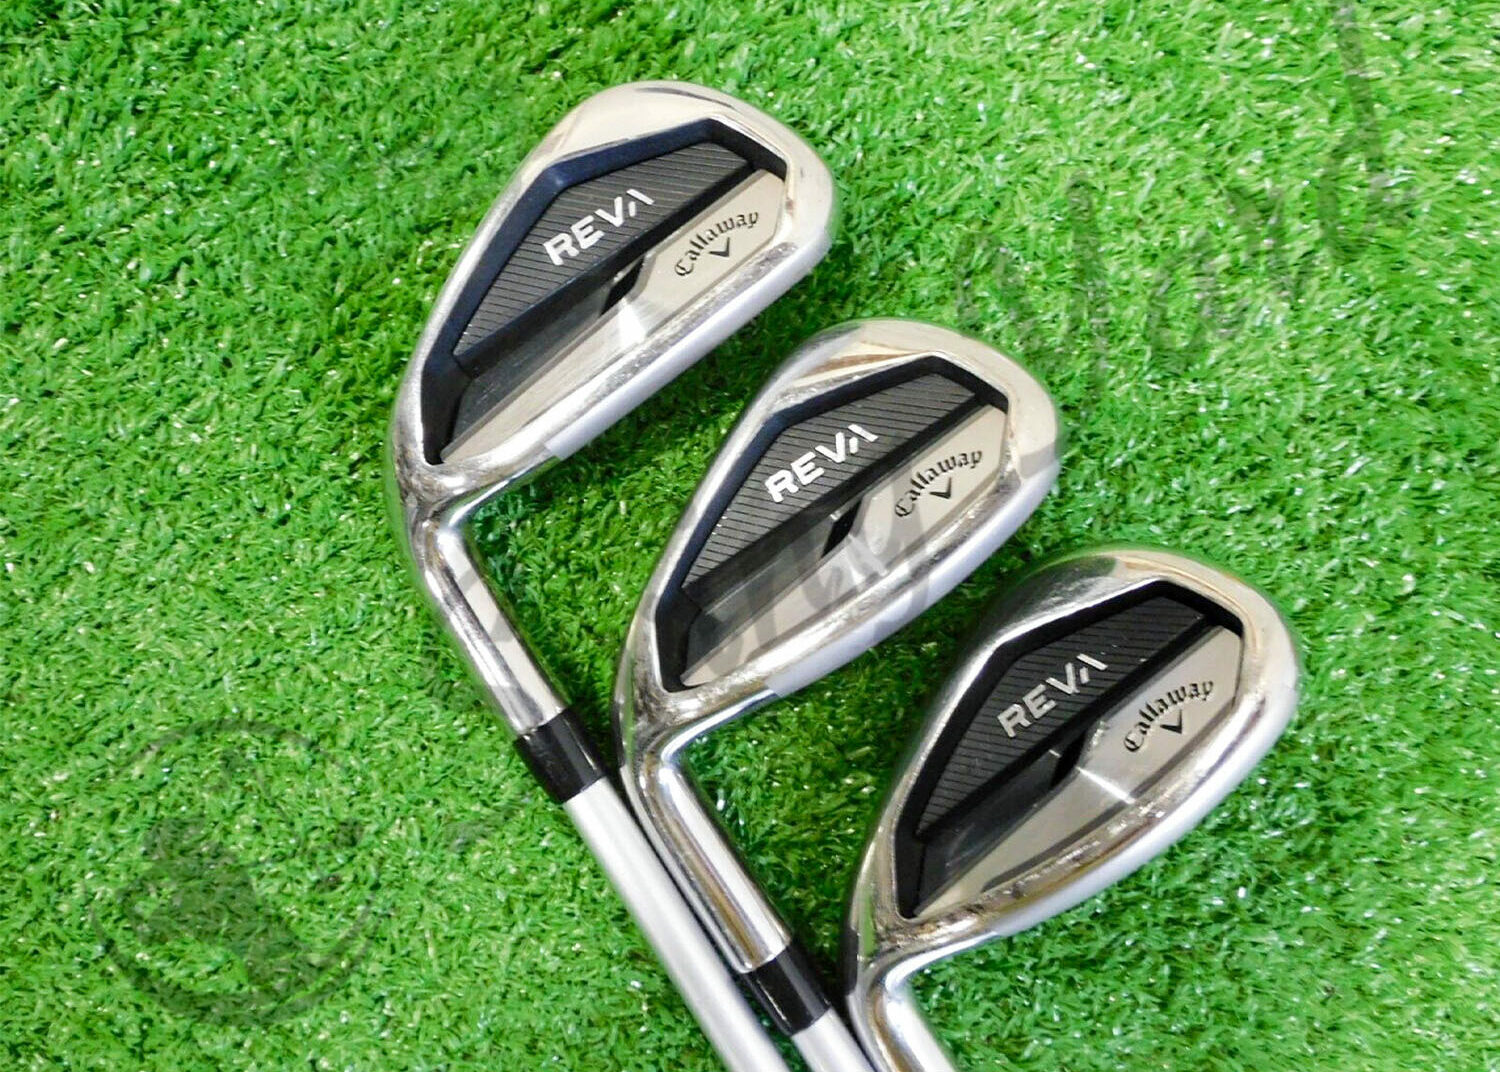 The Callaway Reva Irons in the grass for testing at the golf course